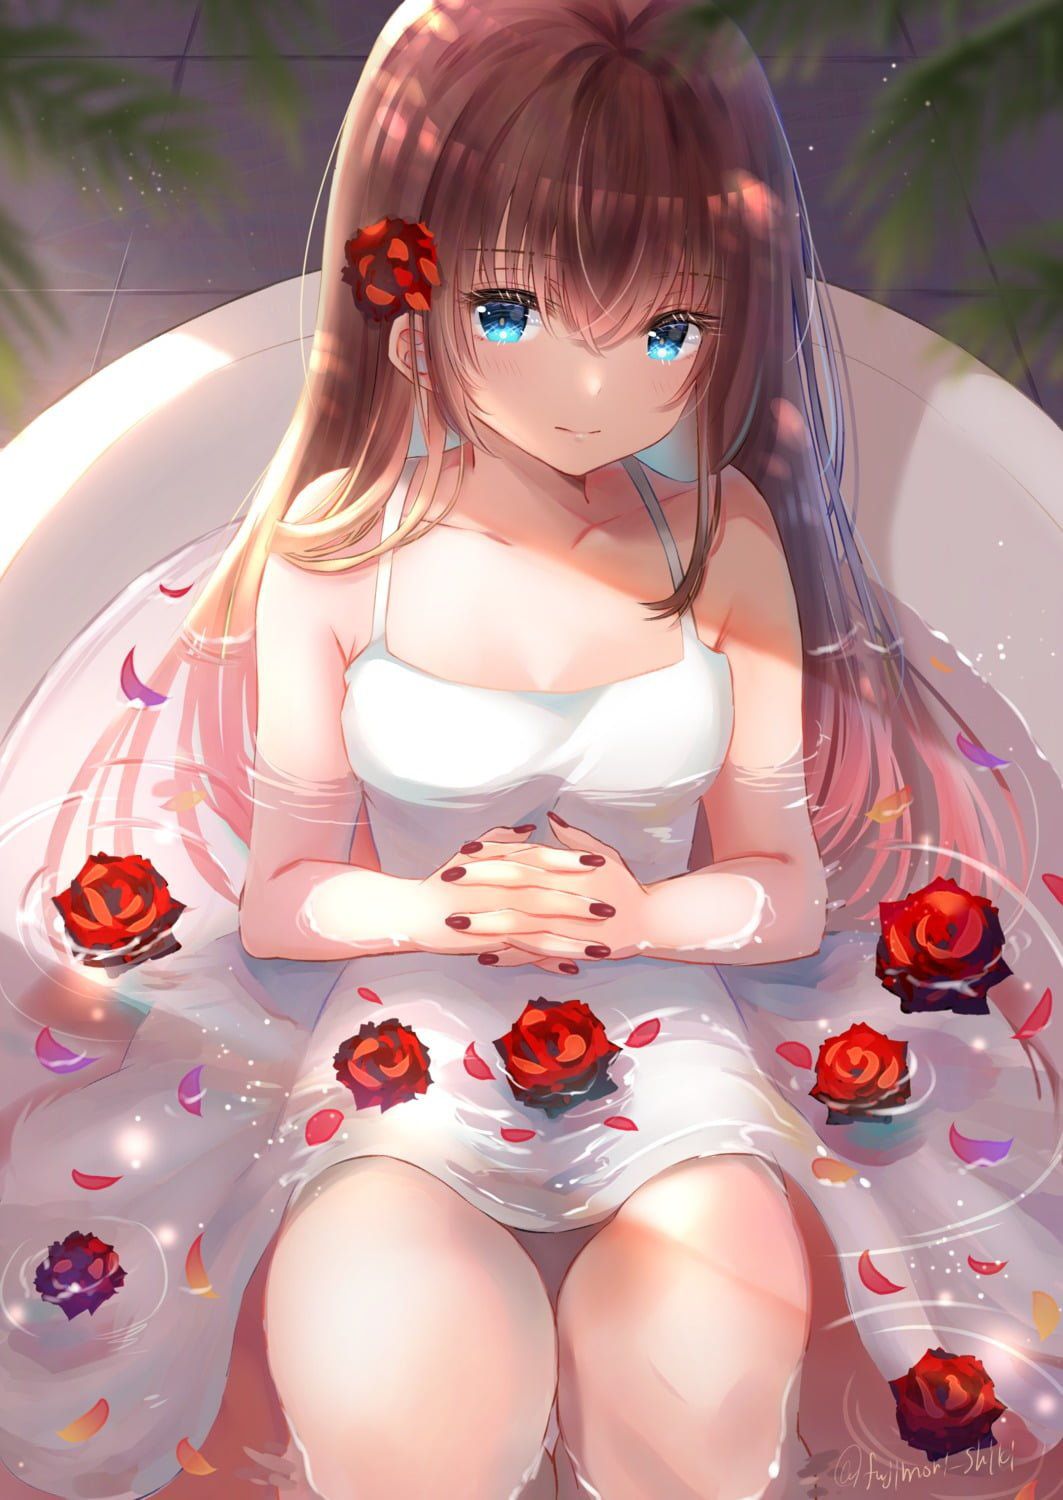 Let's gaze at the bath scene of a defenseless girl during relaxation time! 30